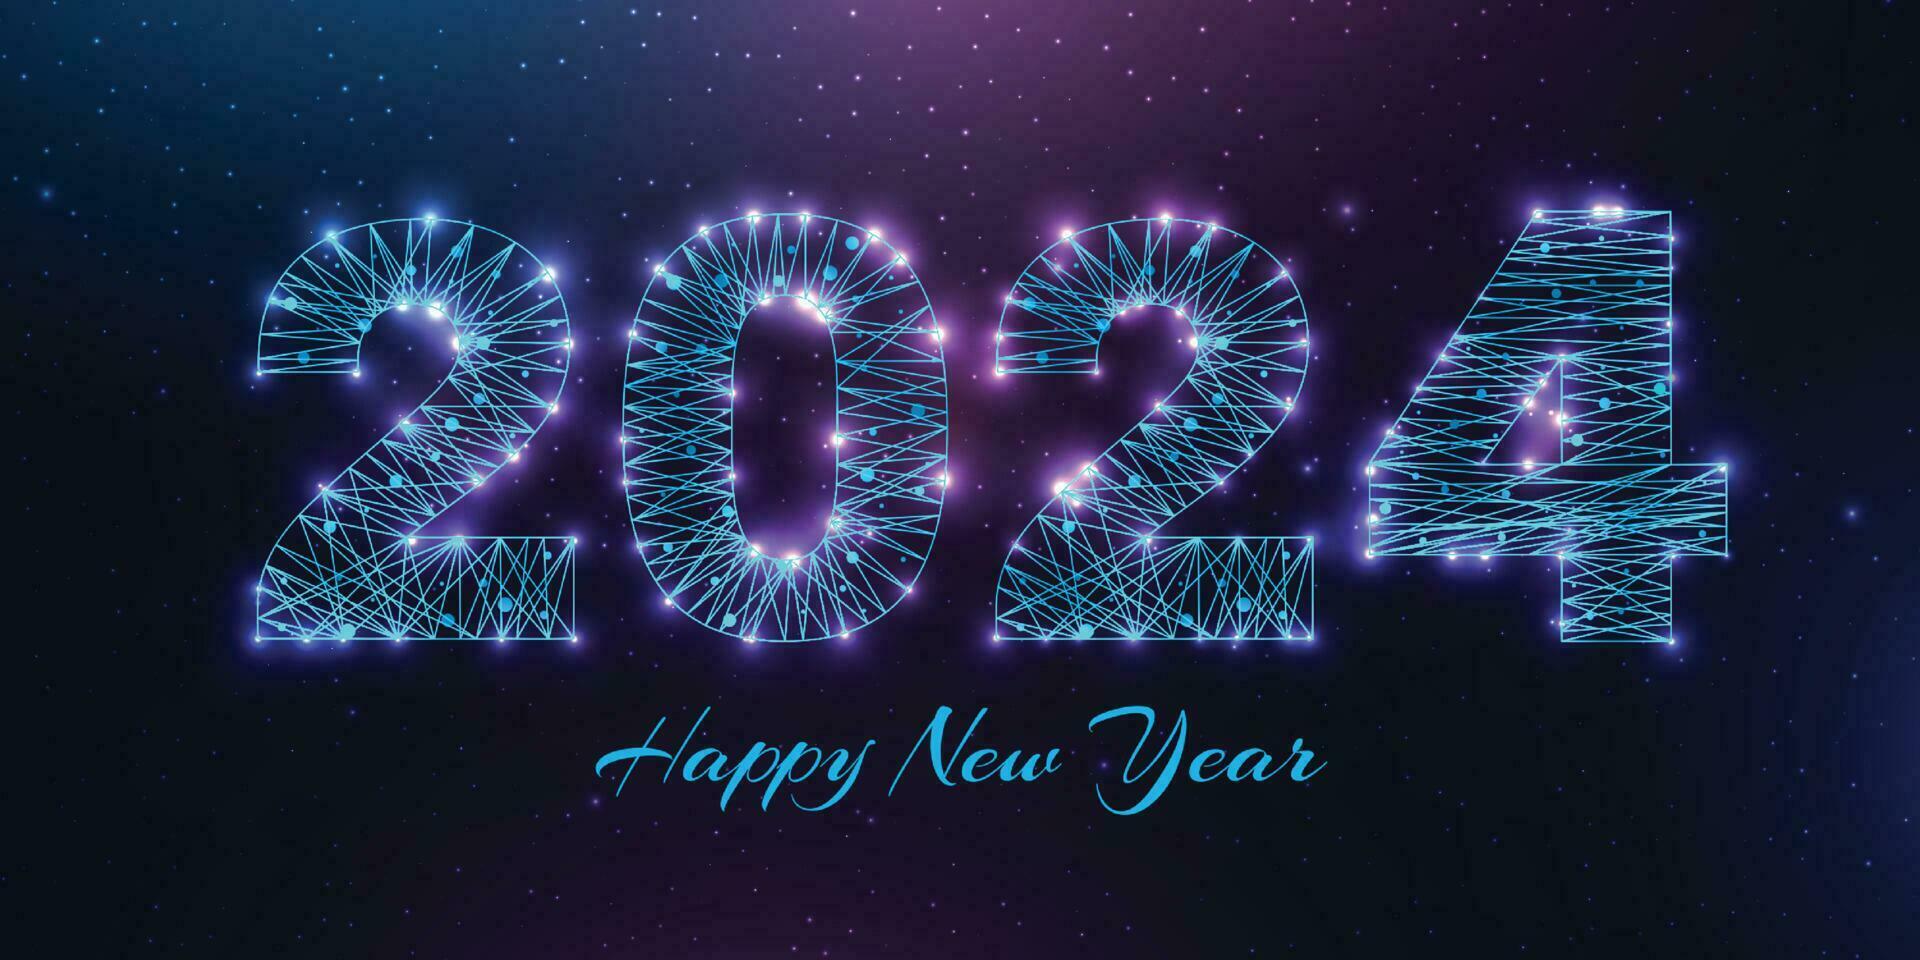 Happy new year 2024 greeting card low poly style design numbers from a polygonal wireframe mesh abstract illustration on dark background vector